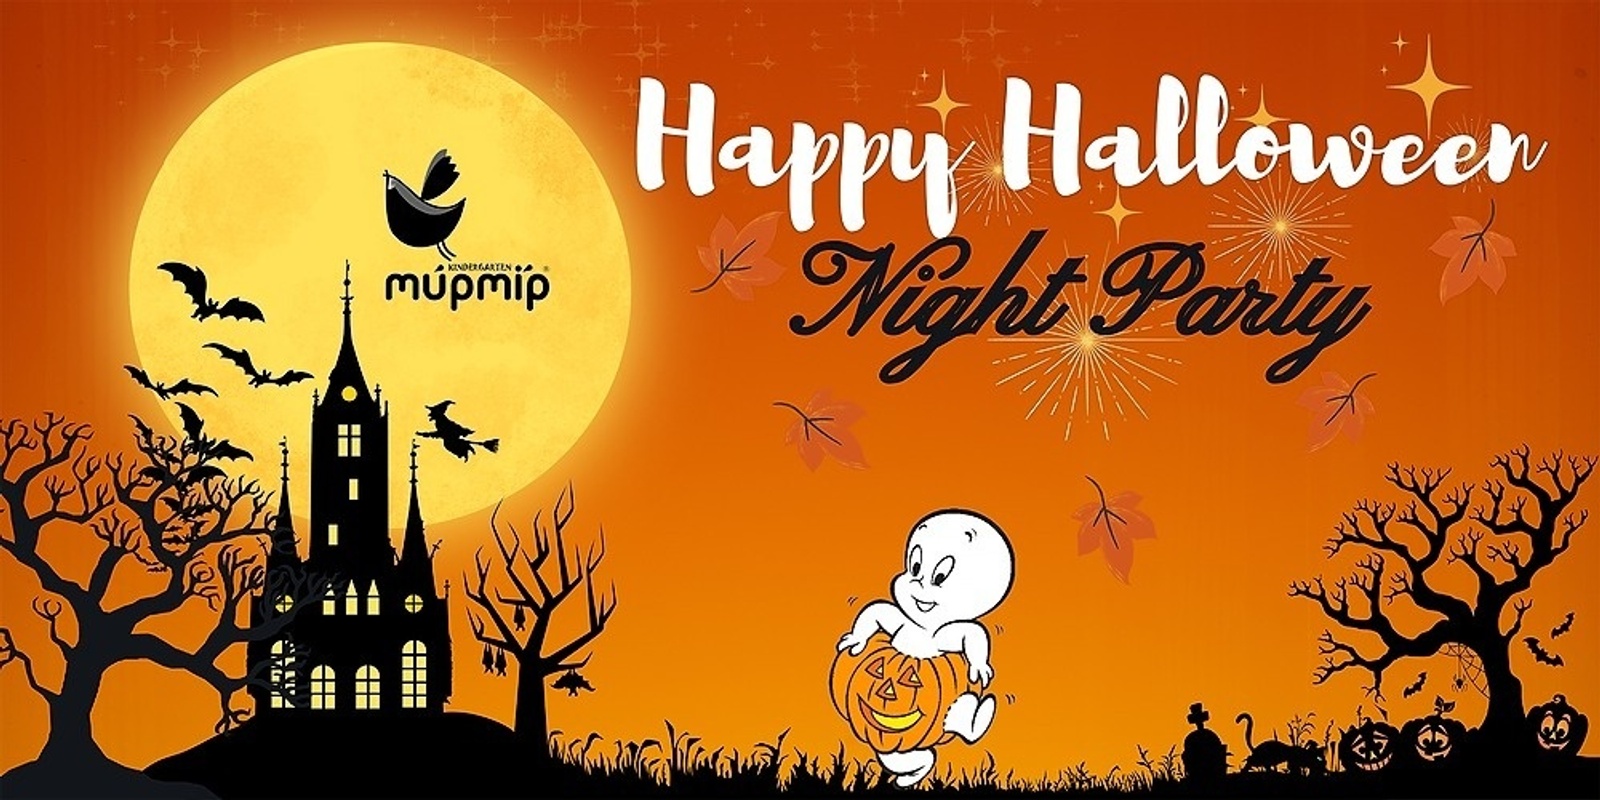 Banner image for Halloween 2022 - Night Party